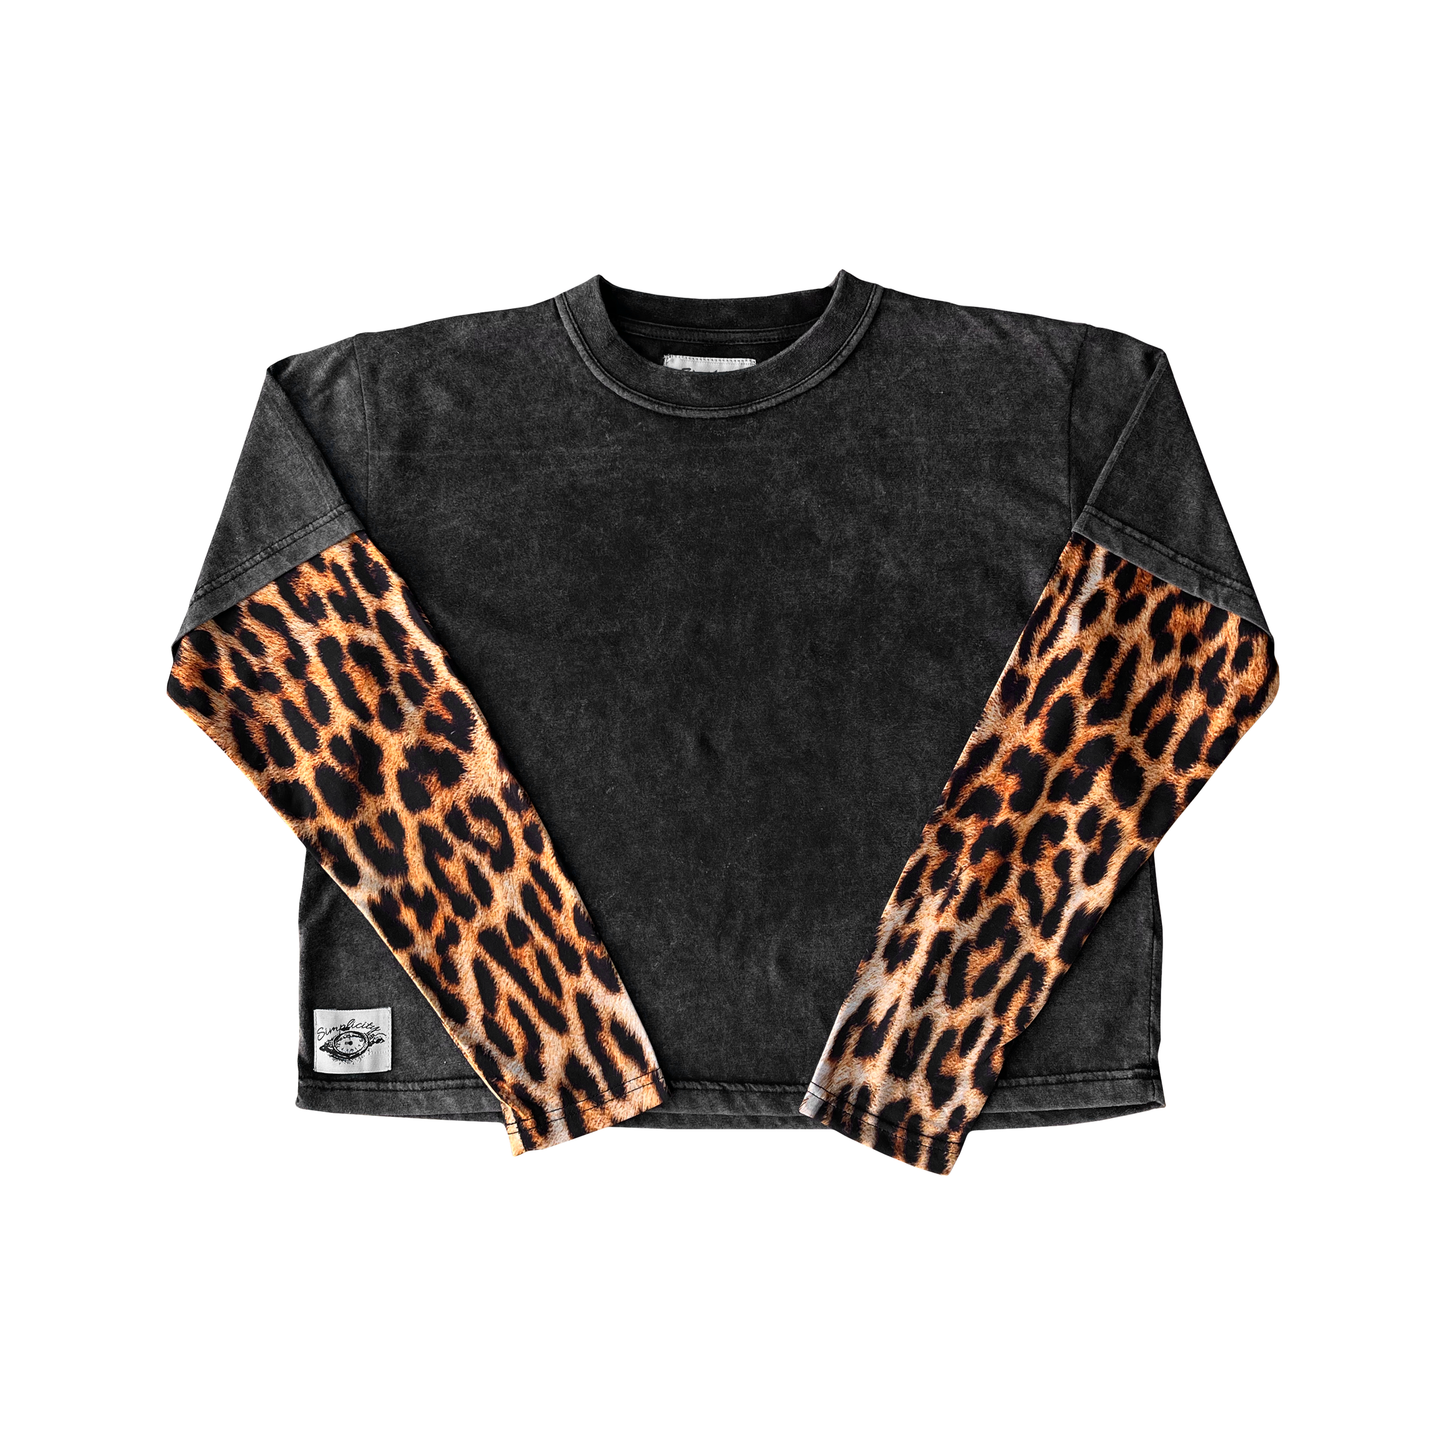 "LEOPARD" DOUBLE LAYER TEE